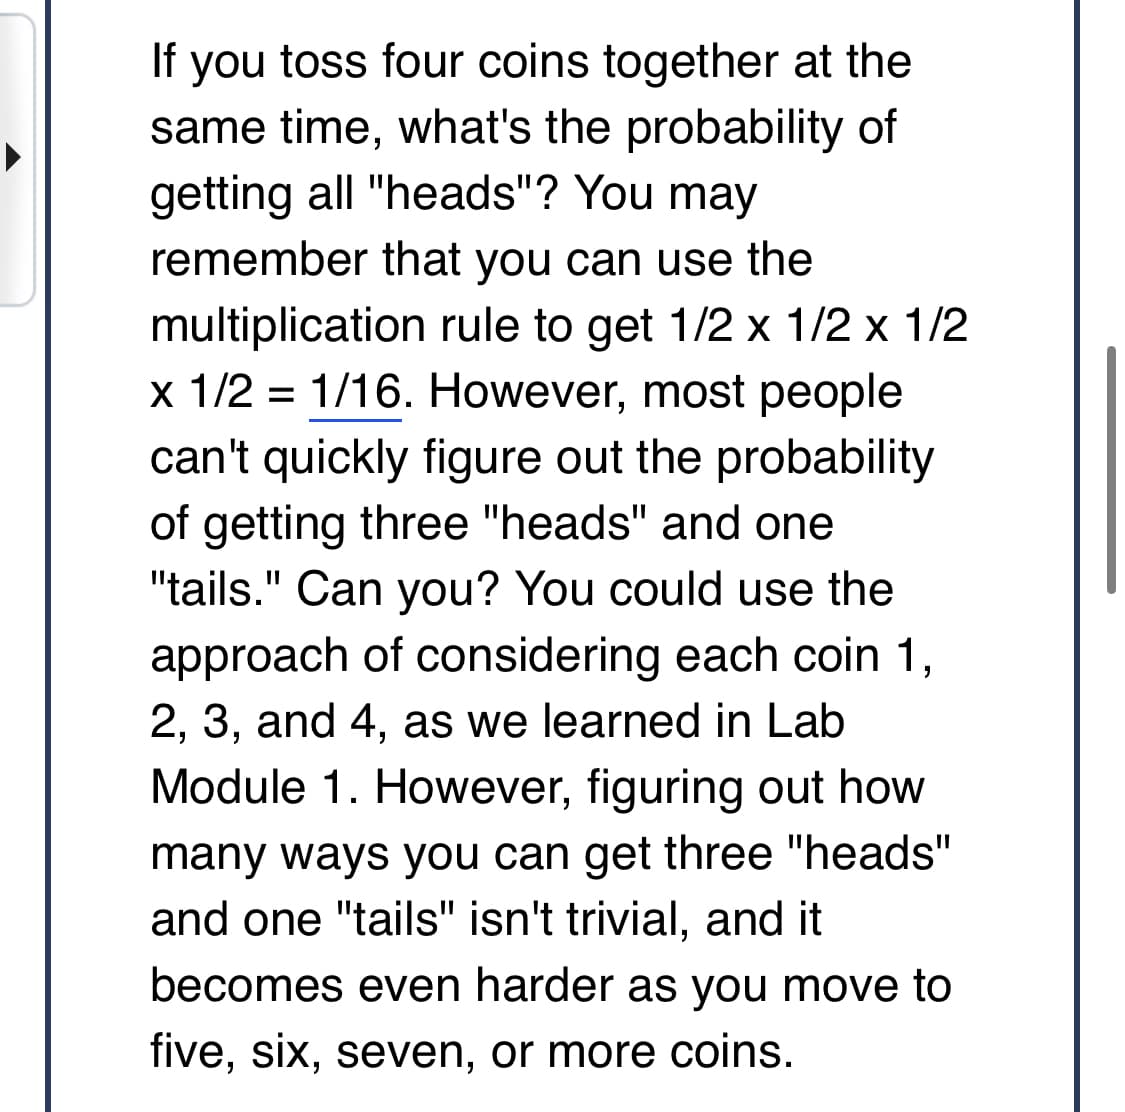 If you toss four coins together at the
same time, what's the probability of
getting all "heads"? You may
remember that you can use the
multiplication rule to get 1/2 x 1/2 x 1/2
x 1/2 1/16. However, most people
can't quickly figure out the probability
of getting three "heads" and one
"tails." Can you? You could use the
approach of considering each coin 1,
2, 3, and 4, as we learned in Lab
Module 1. However, figuring out how
many ways you can get three "heads"
and one "tails" isn't trivial, and it
becomes even harder as you move to
five, six, seven, or more coins.
=